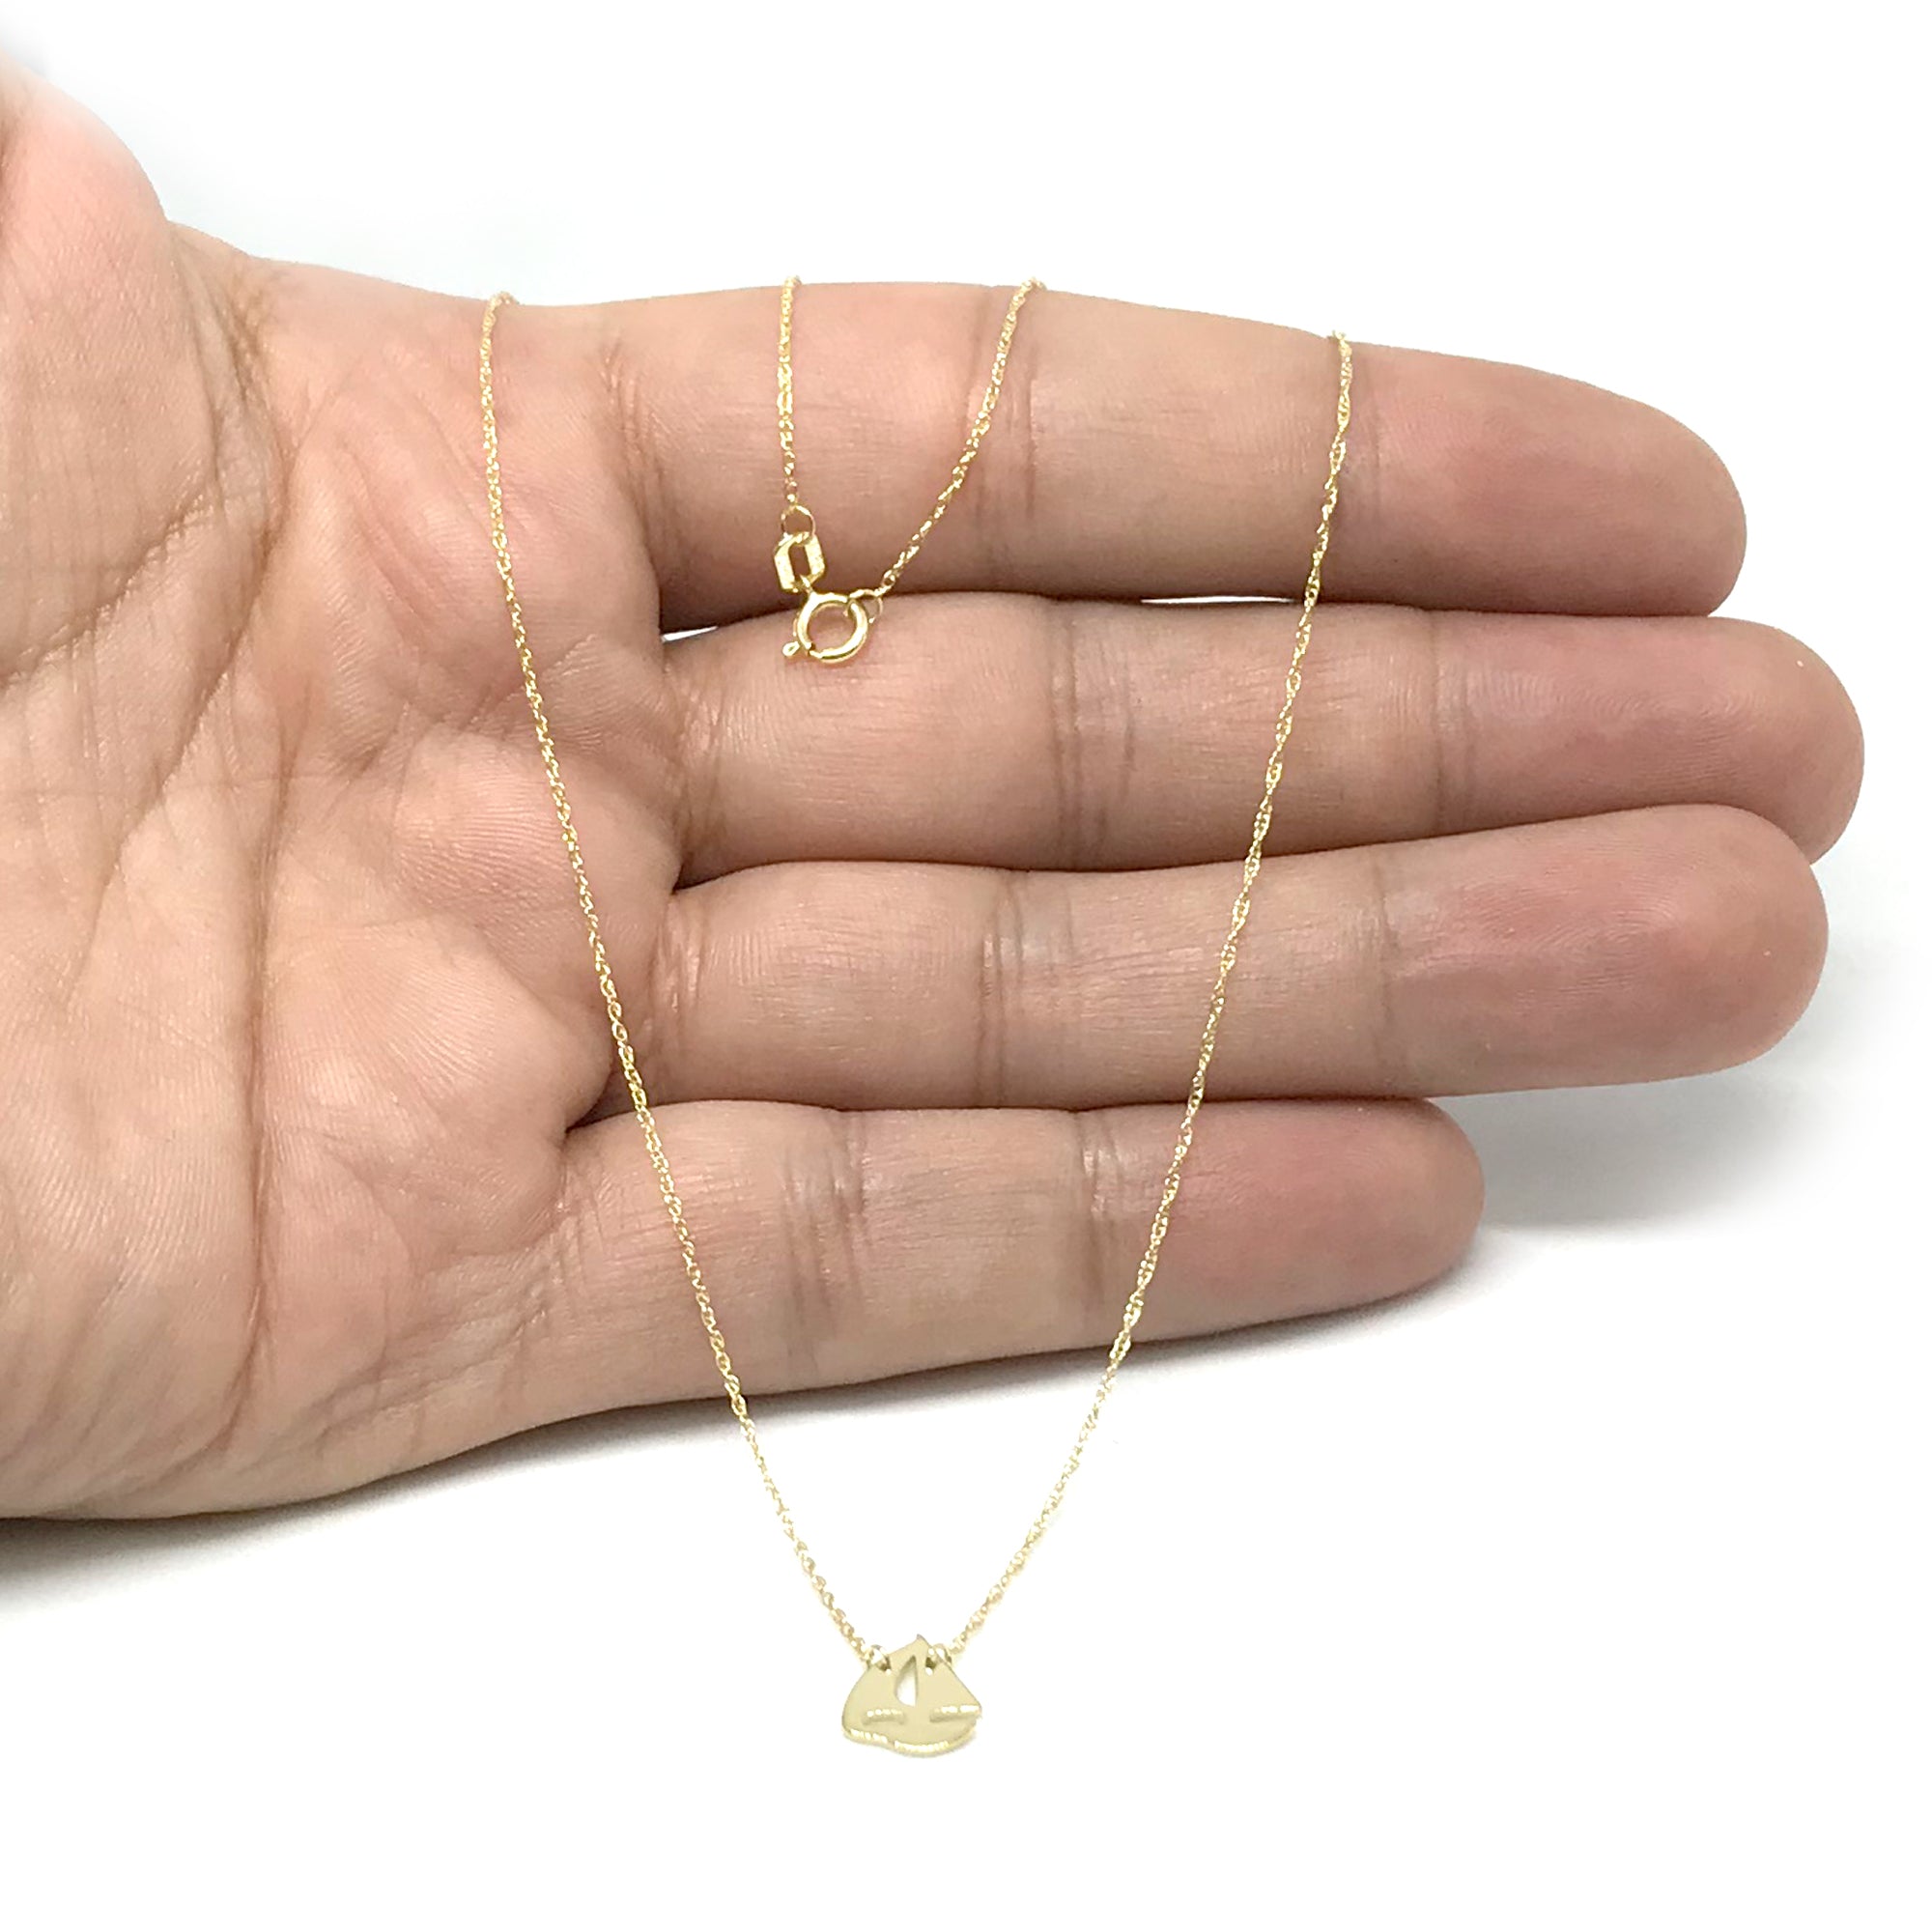 14K Yellow Gold Mini Sailing Boat Pendant Necklace, 16" To 18" Adjustable fine designer jewelry for men and women